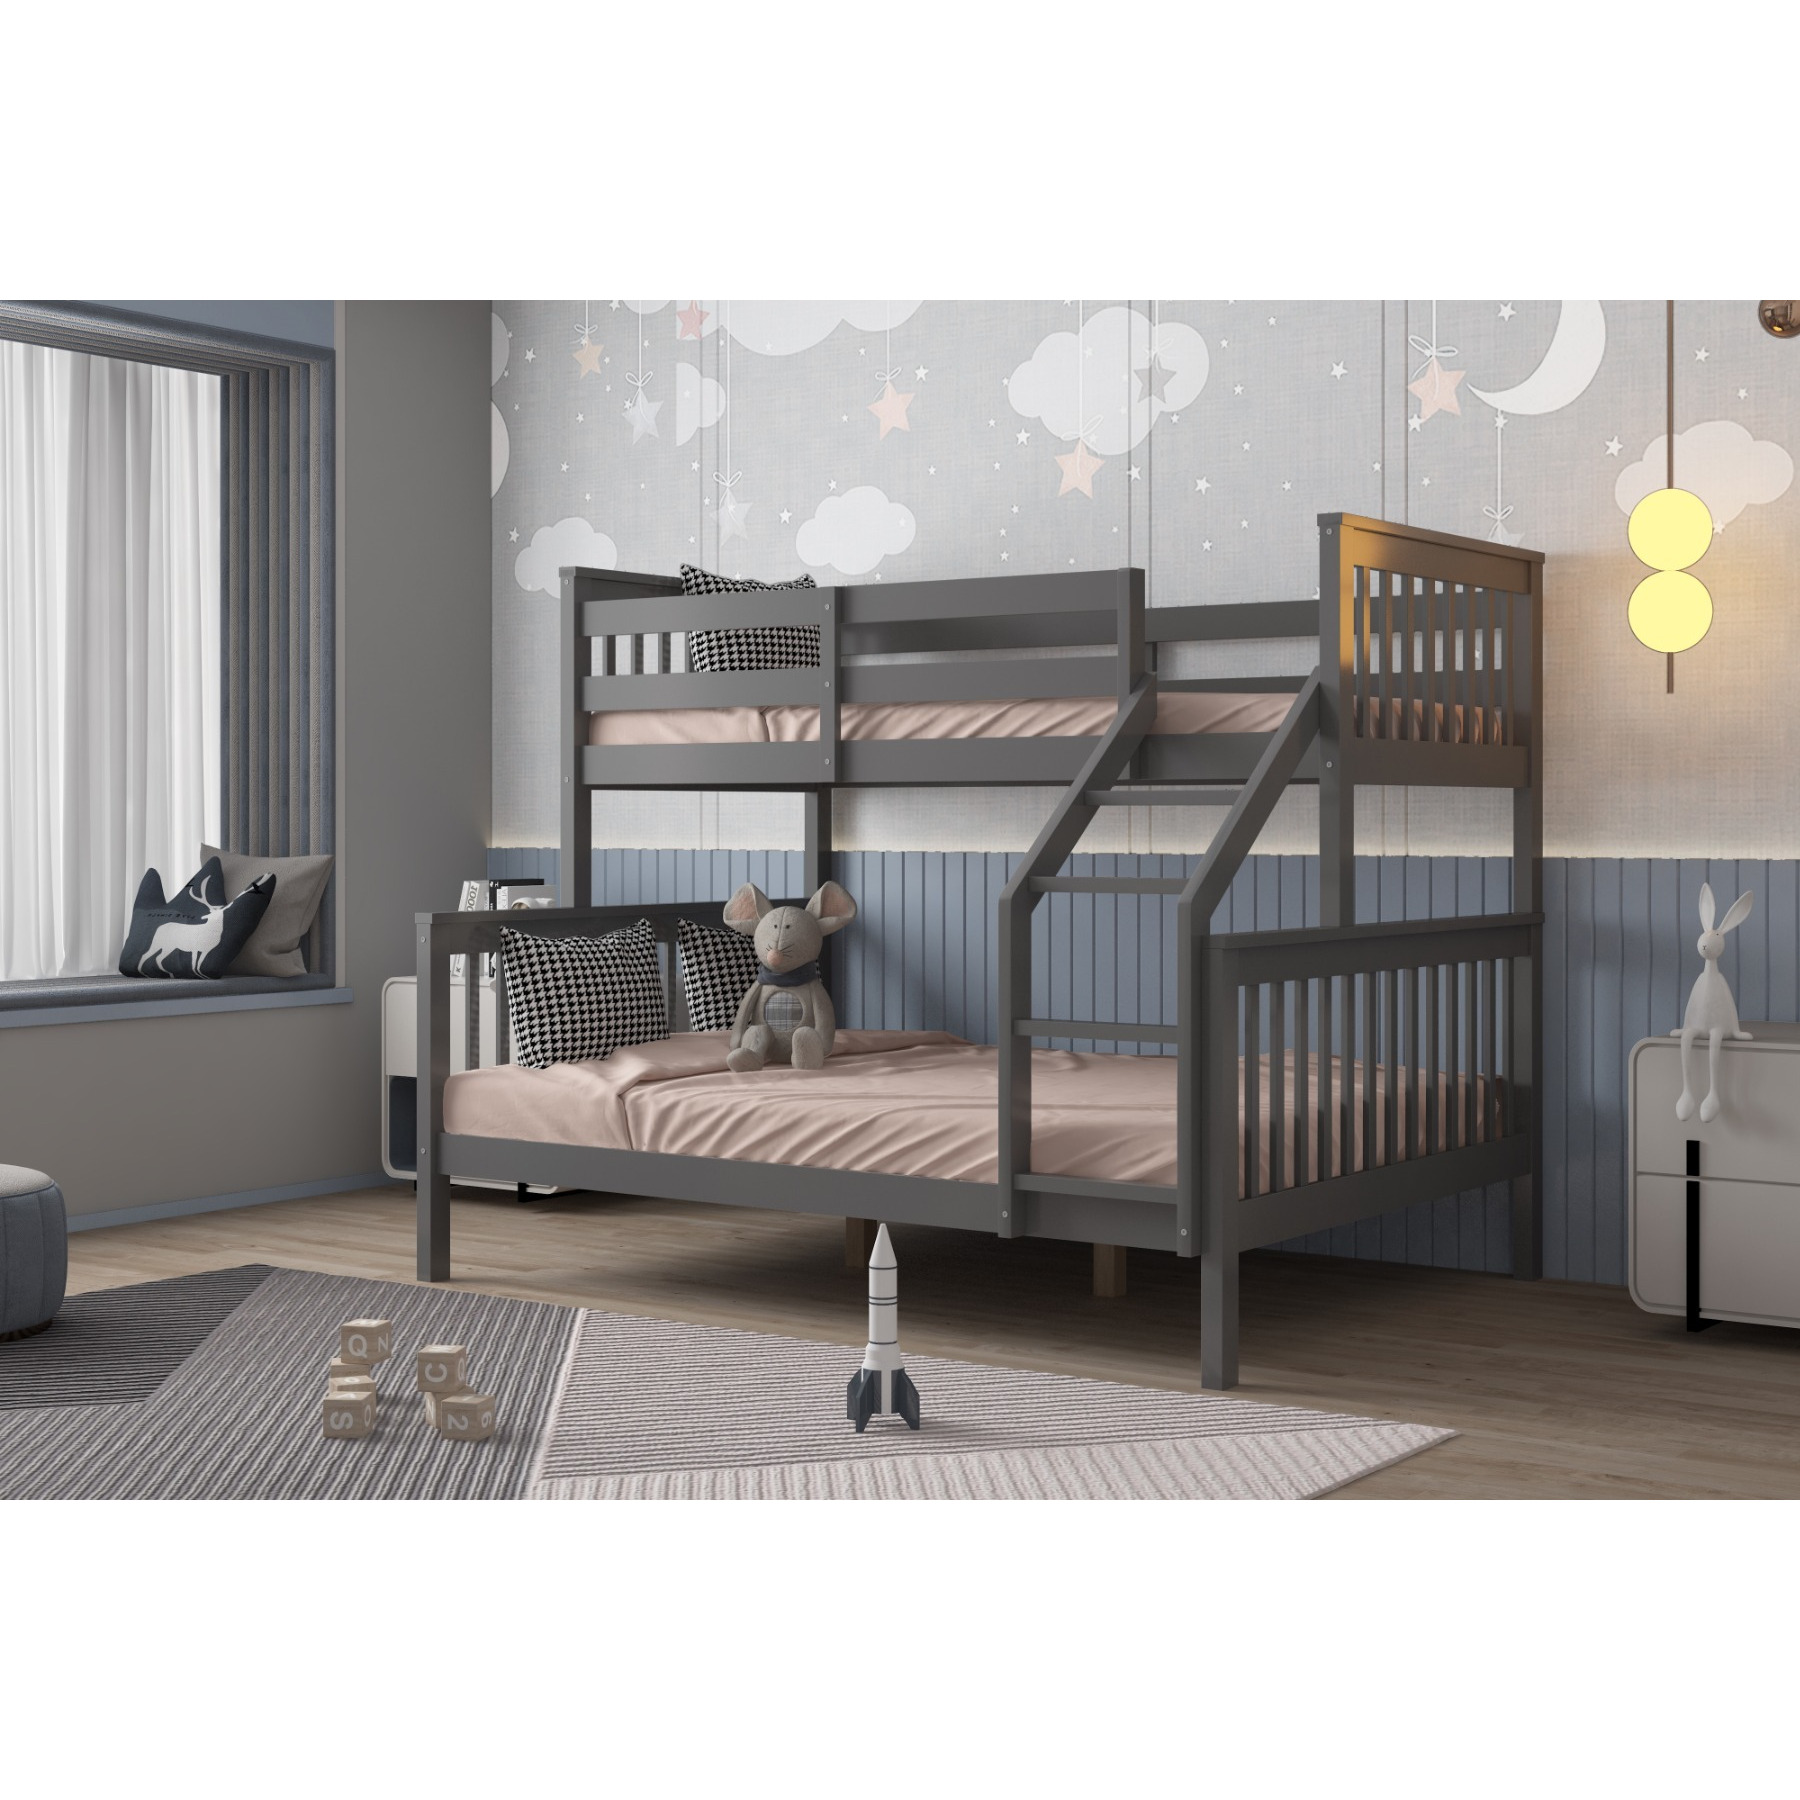 Flair Wooden Zoom Triple Bunk Bed Grey - image 1